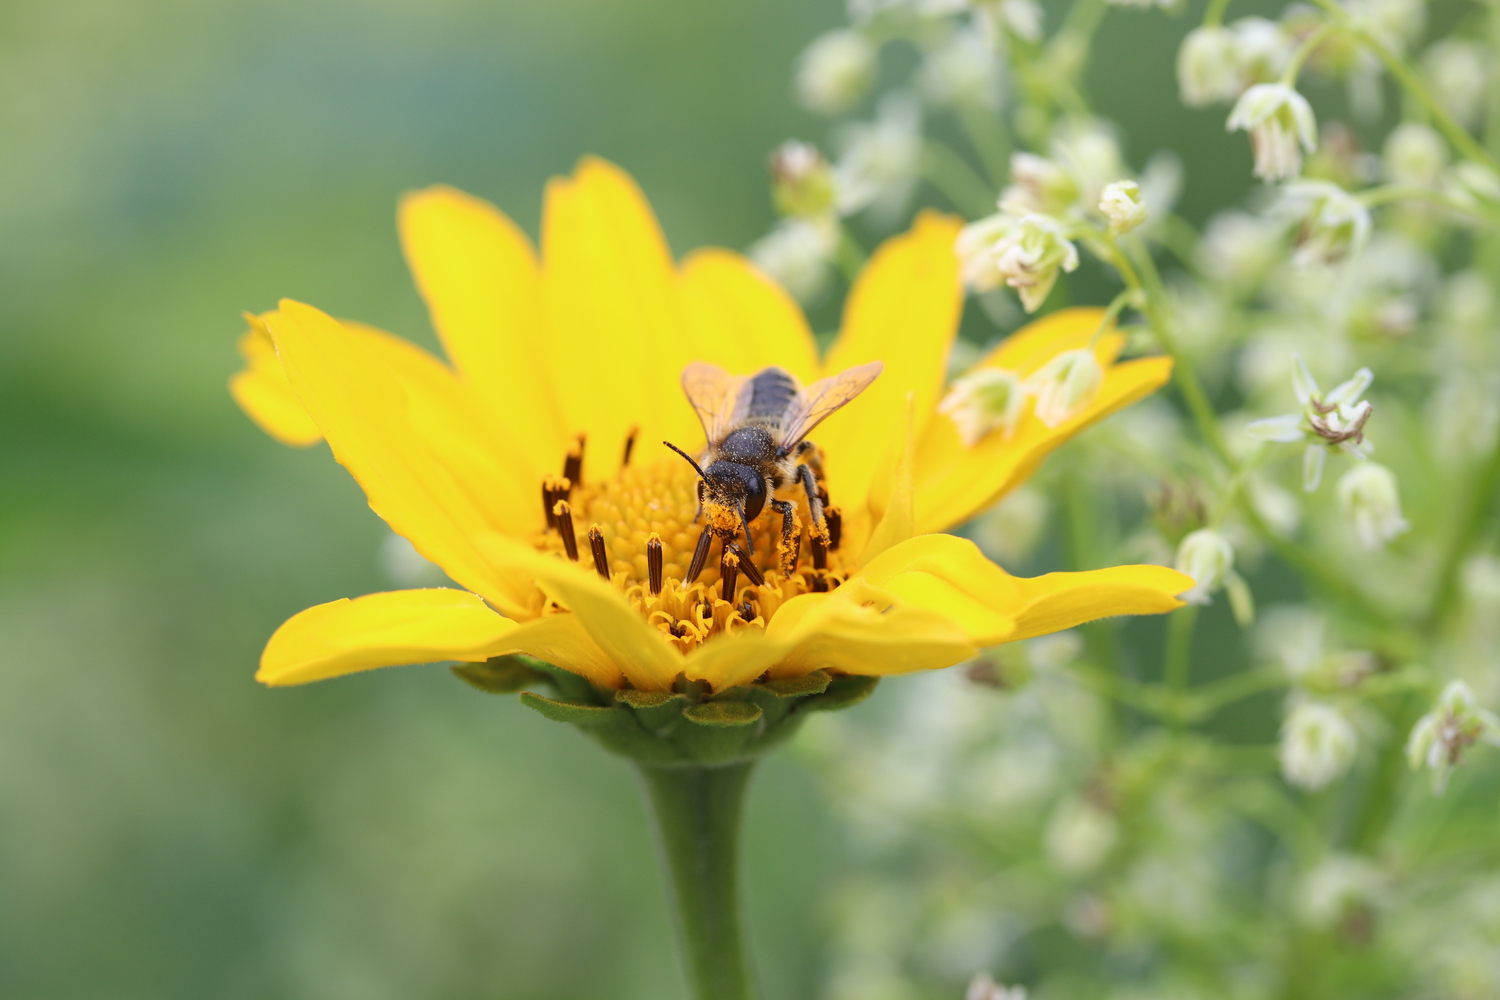 A leafcutter bee on a sunflower.   REBECCA MCMACKIN